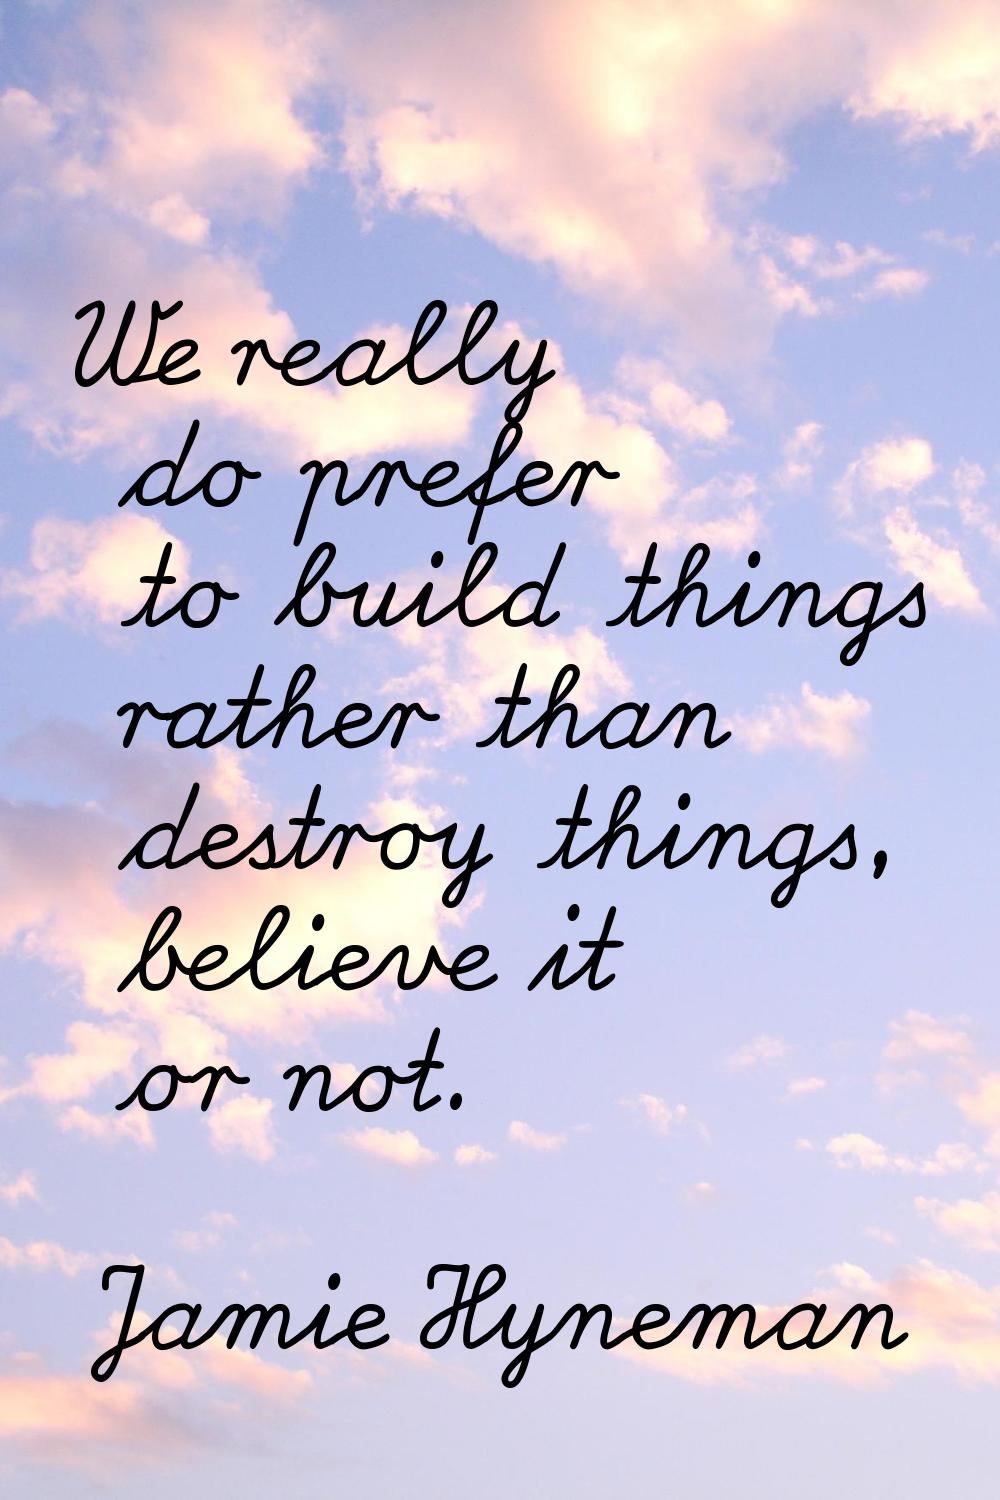 We really do prefer to build things rather than destroy things, believe it or not.